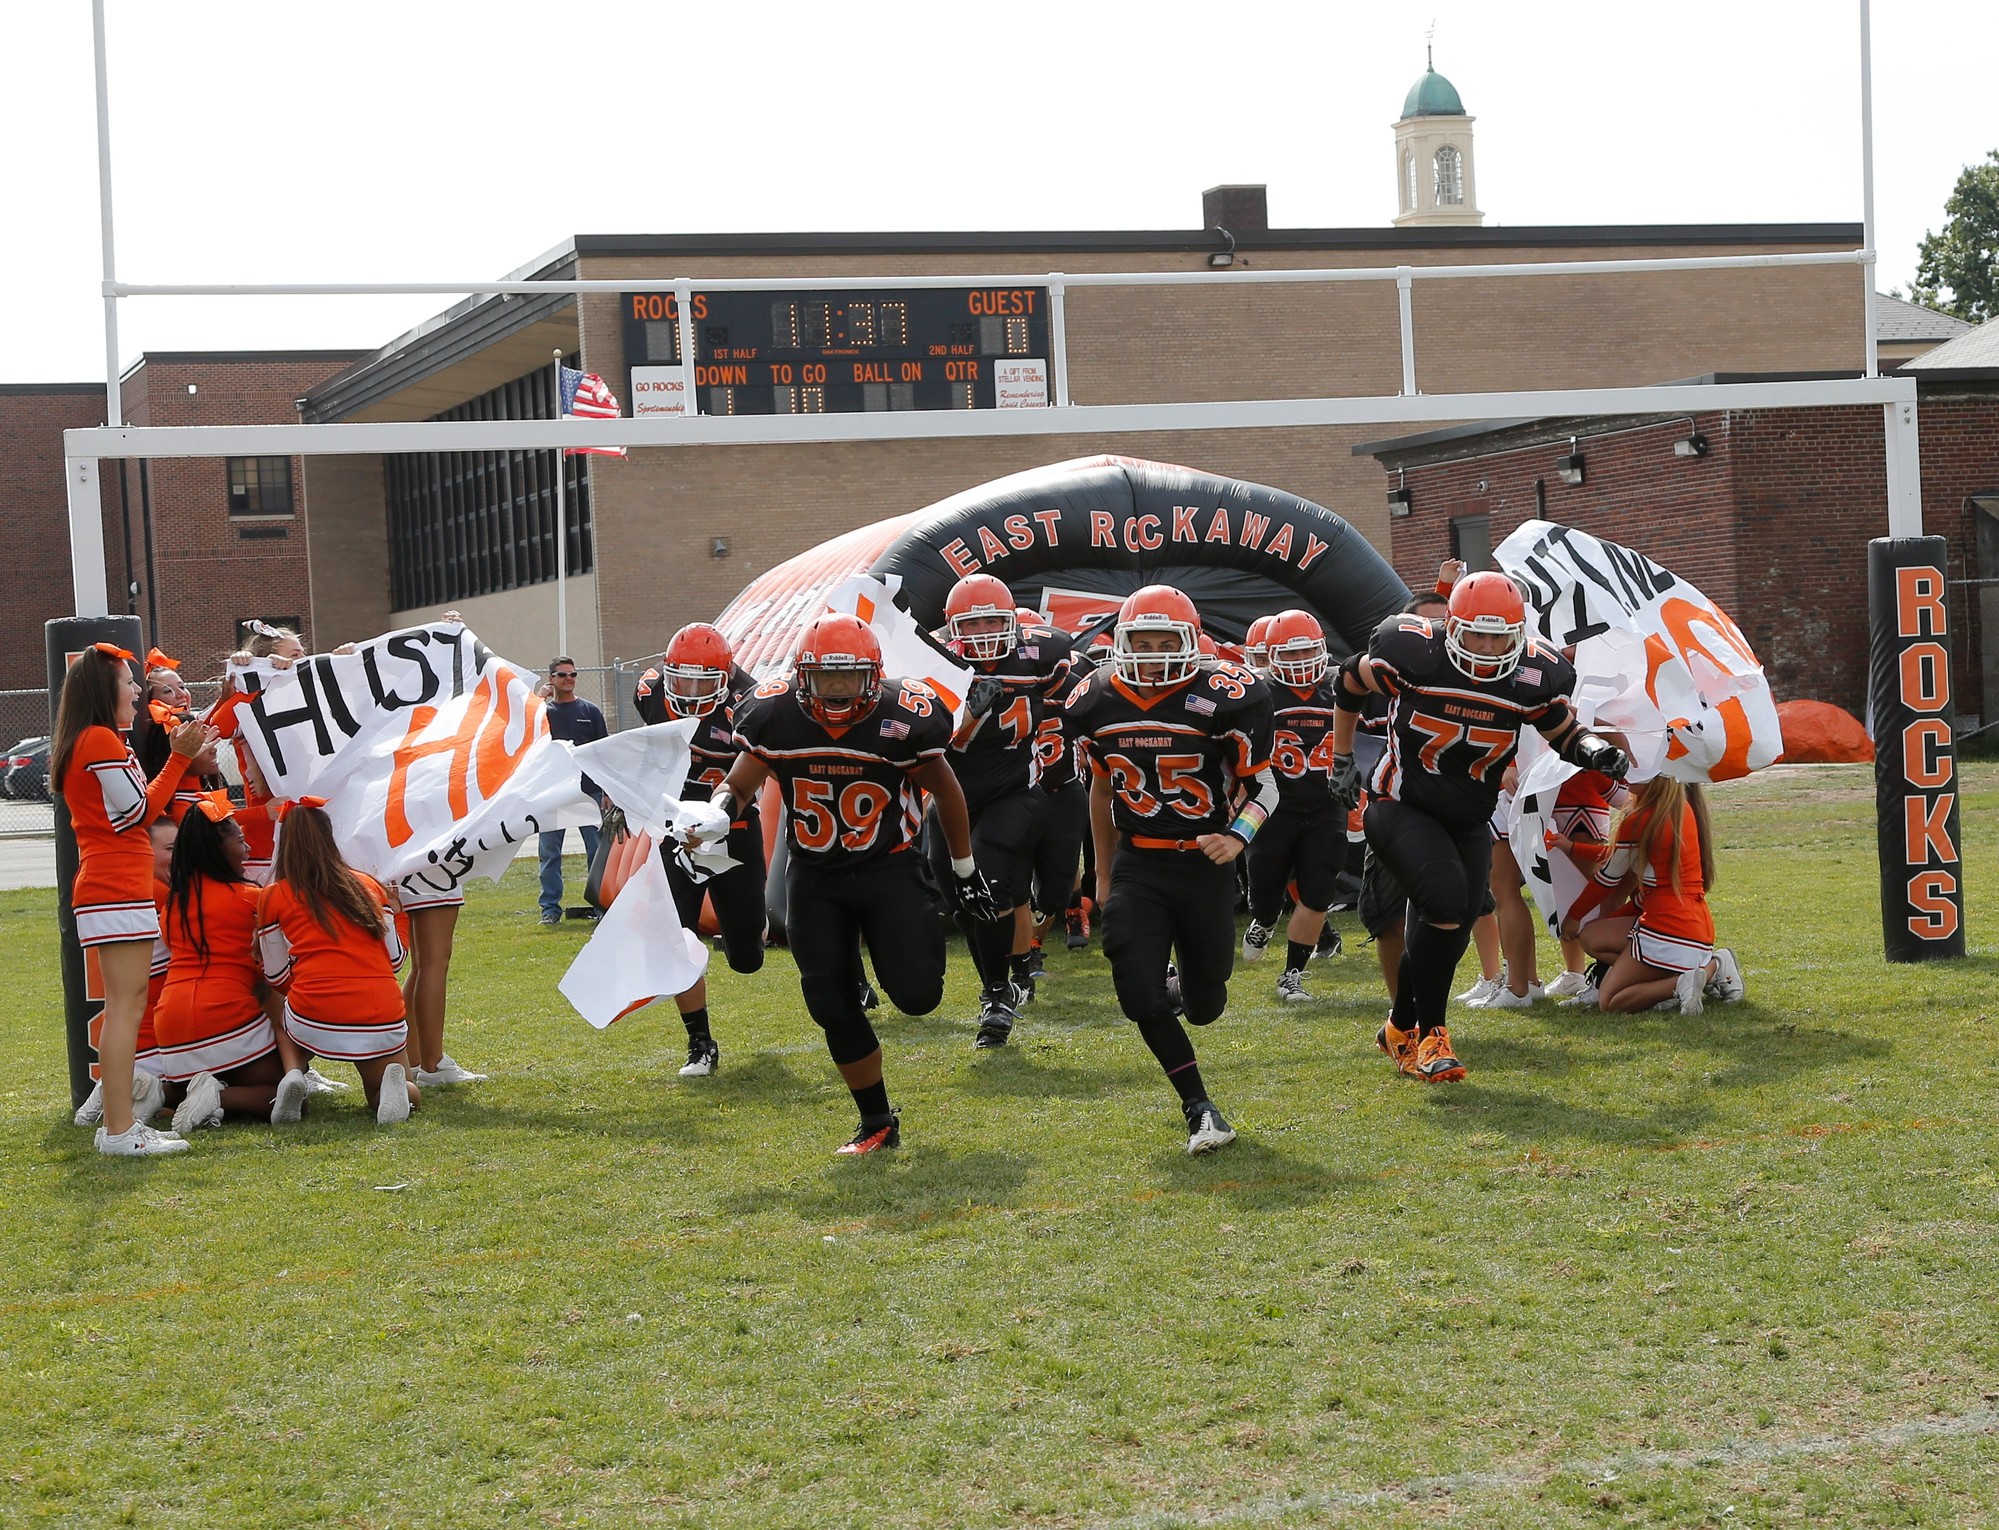 The East Rockaway Rocks celebrated their homecoming game last Saturday against Seaford